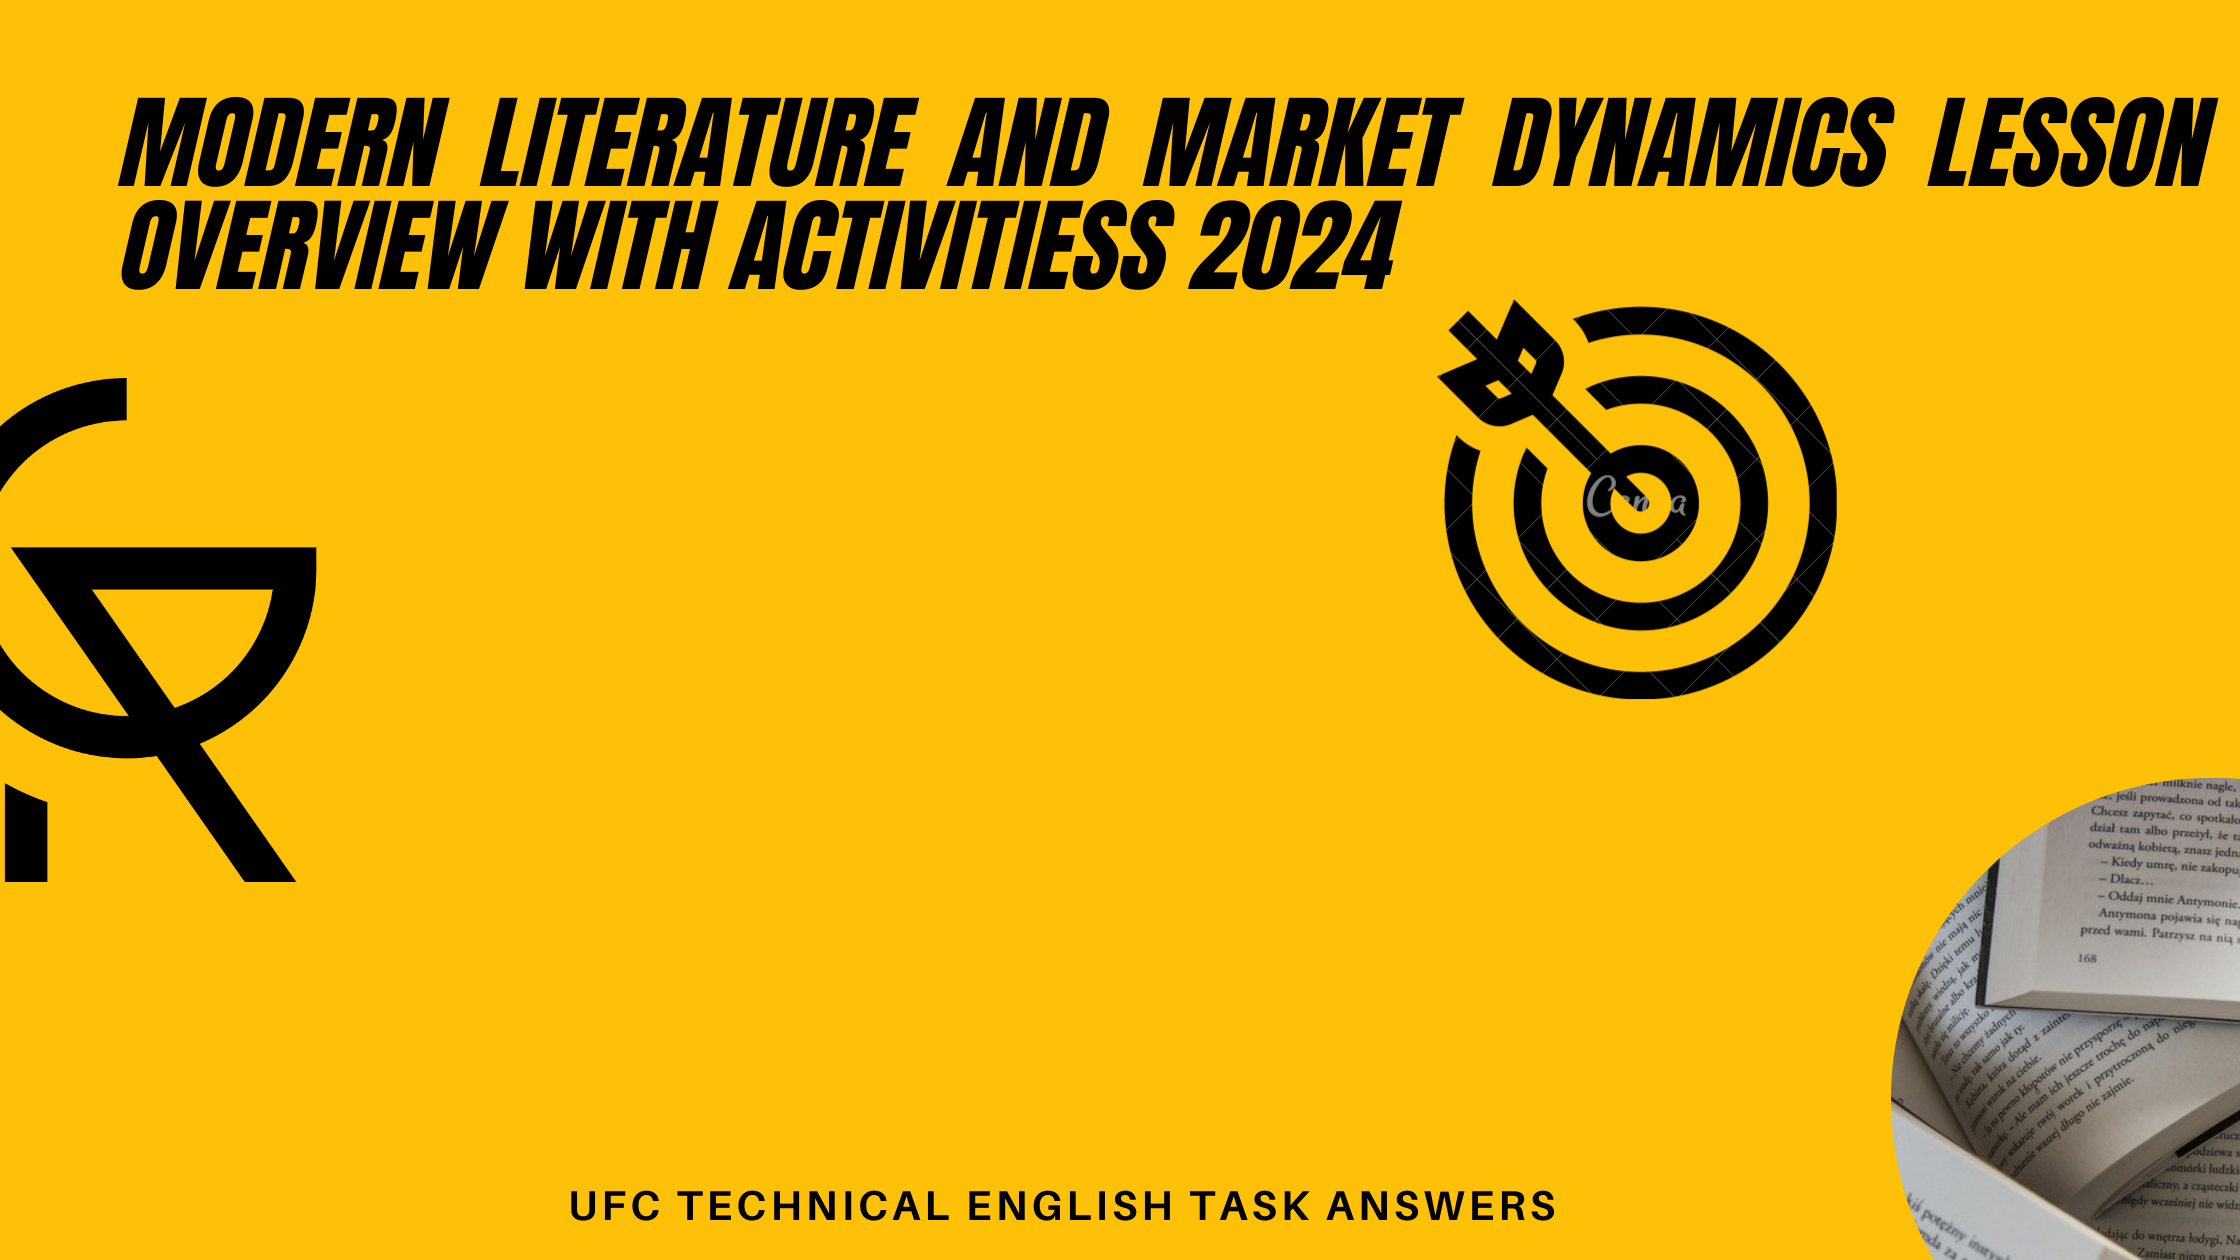 Modern Literature and Market Dynamics lesson overview with activities 2024